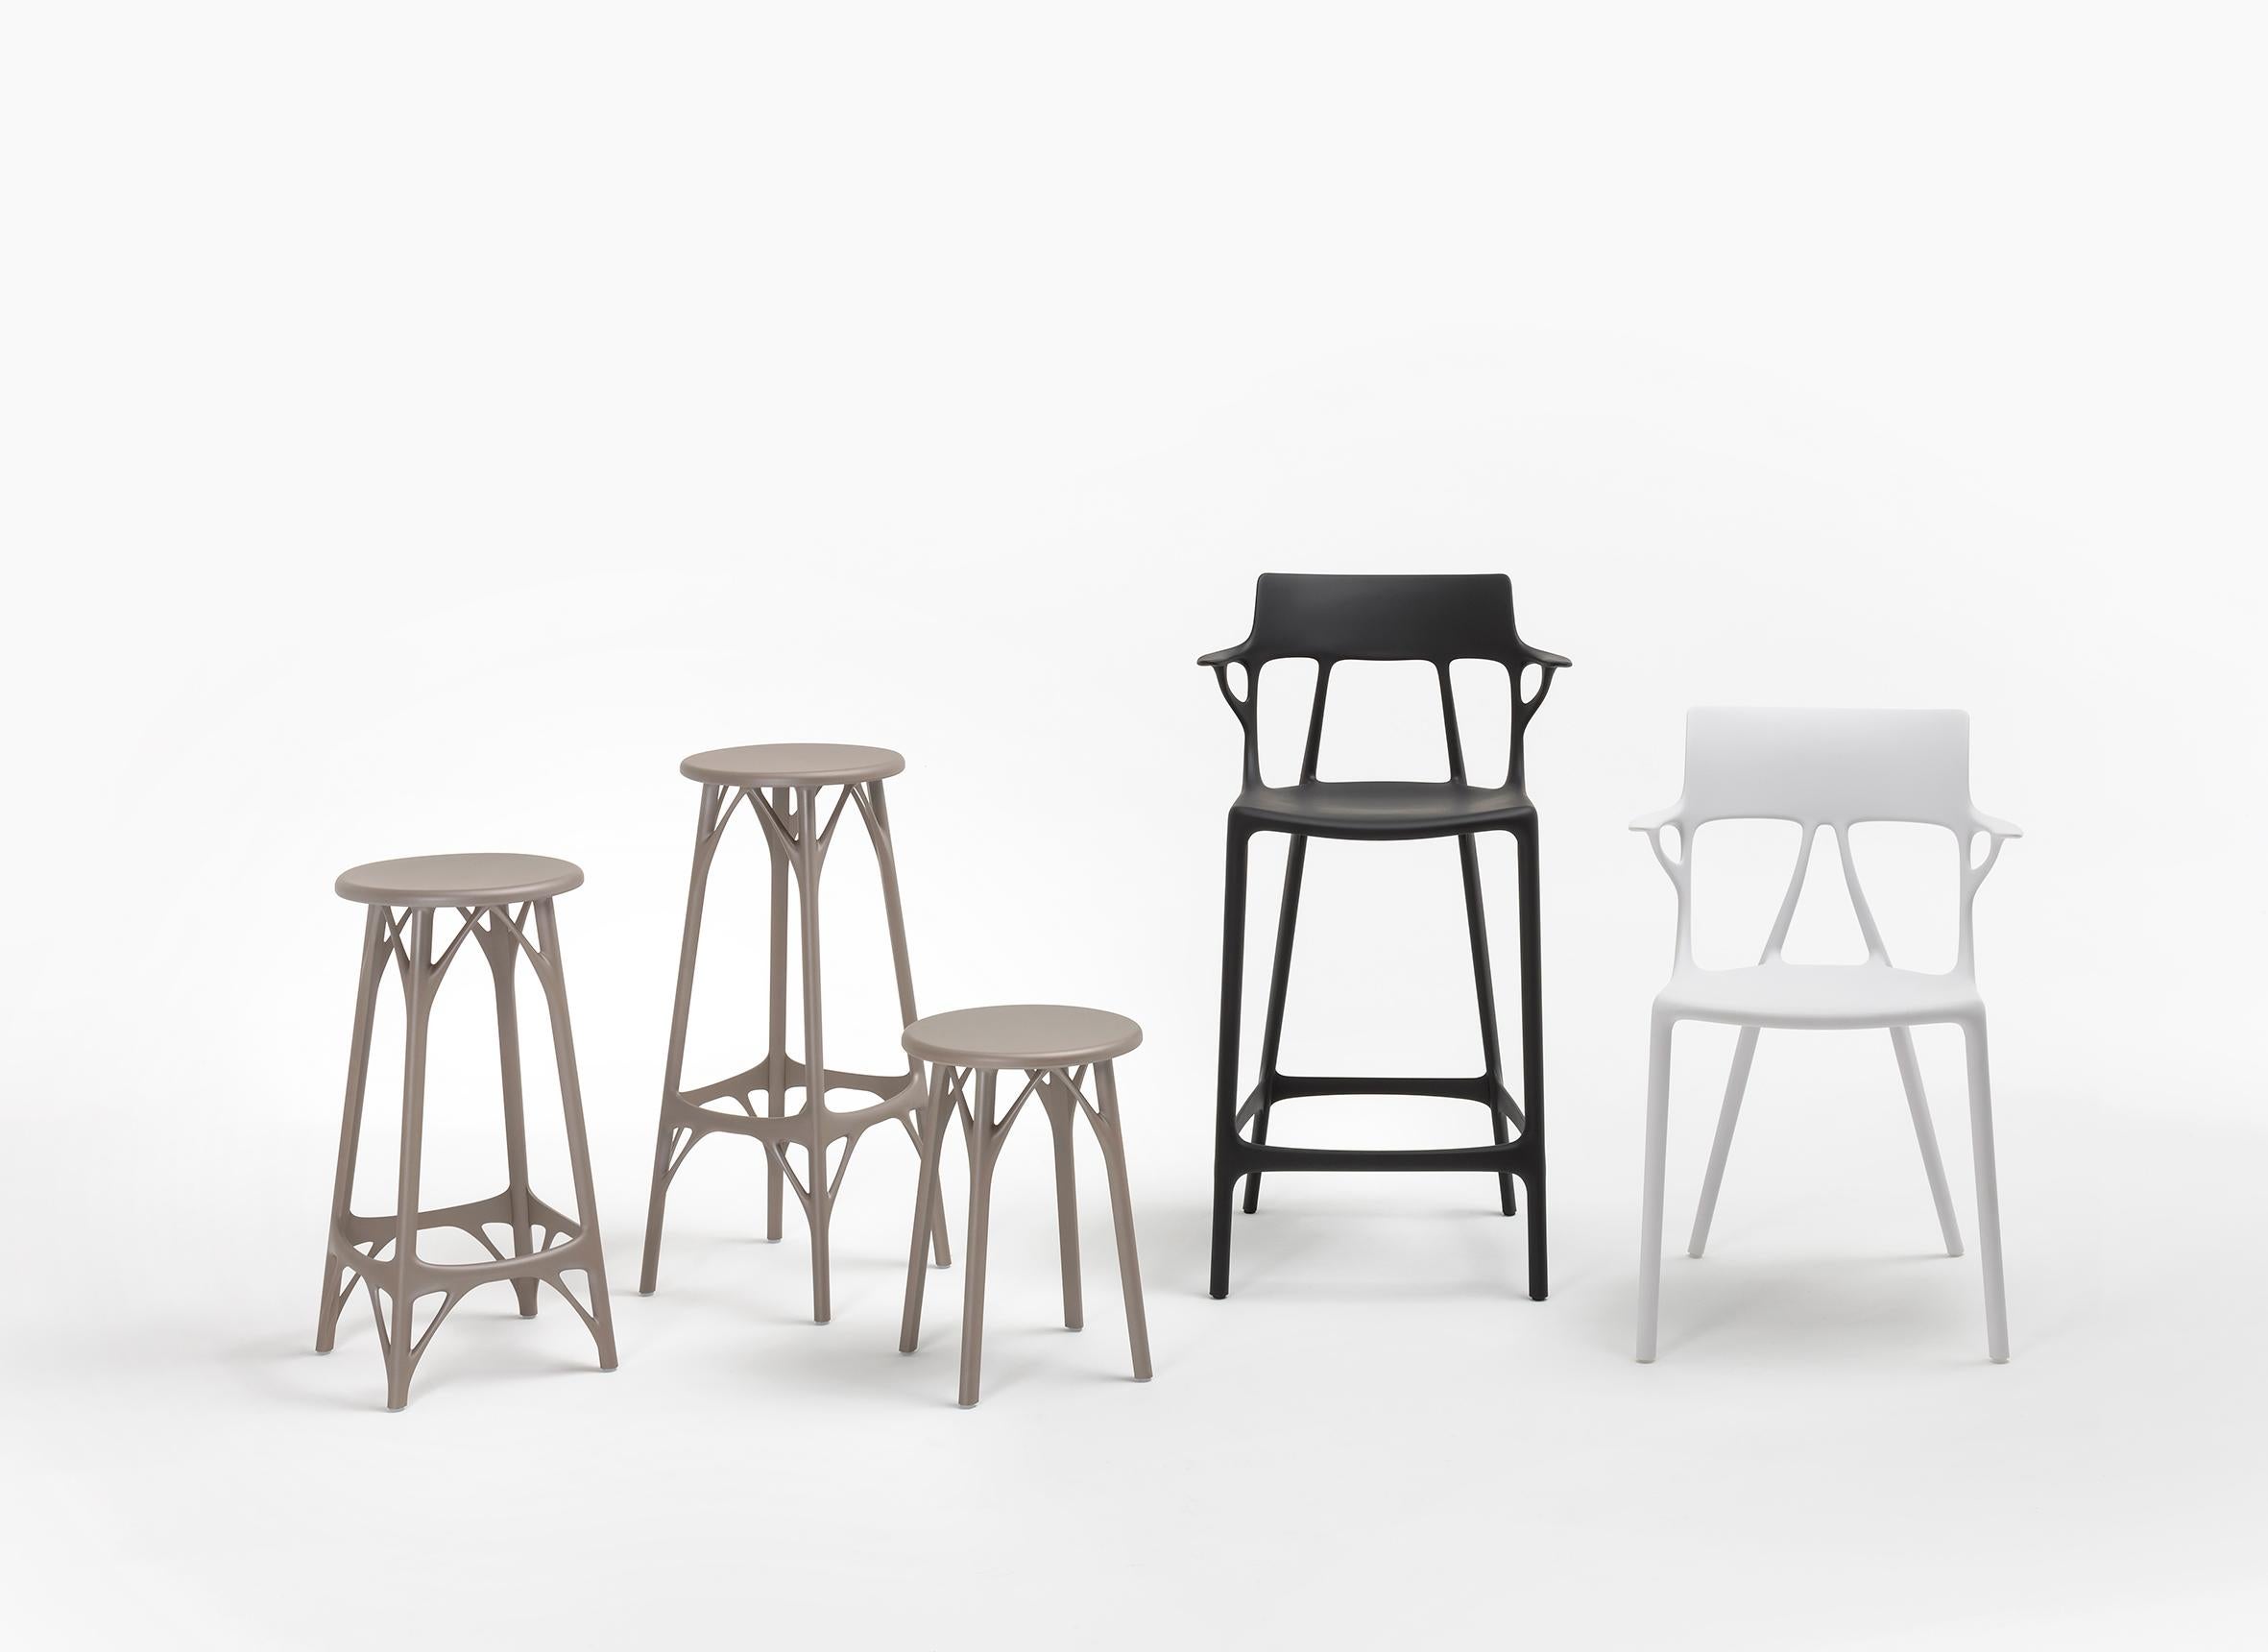 A stool made from recycled material for maximum sustainability. A.I. stool light is sustainable in materials and production process and is the result of thorough optimisation: three models can be made from the same mould, meaning that even